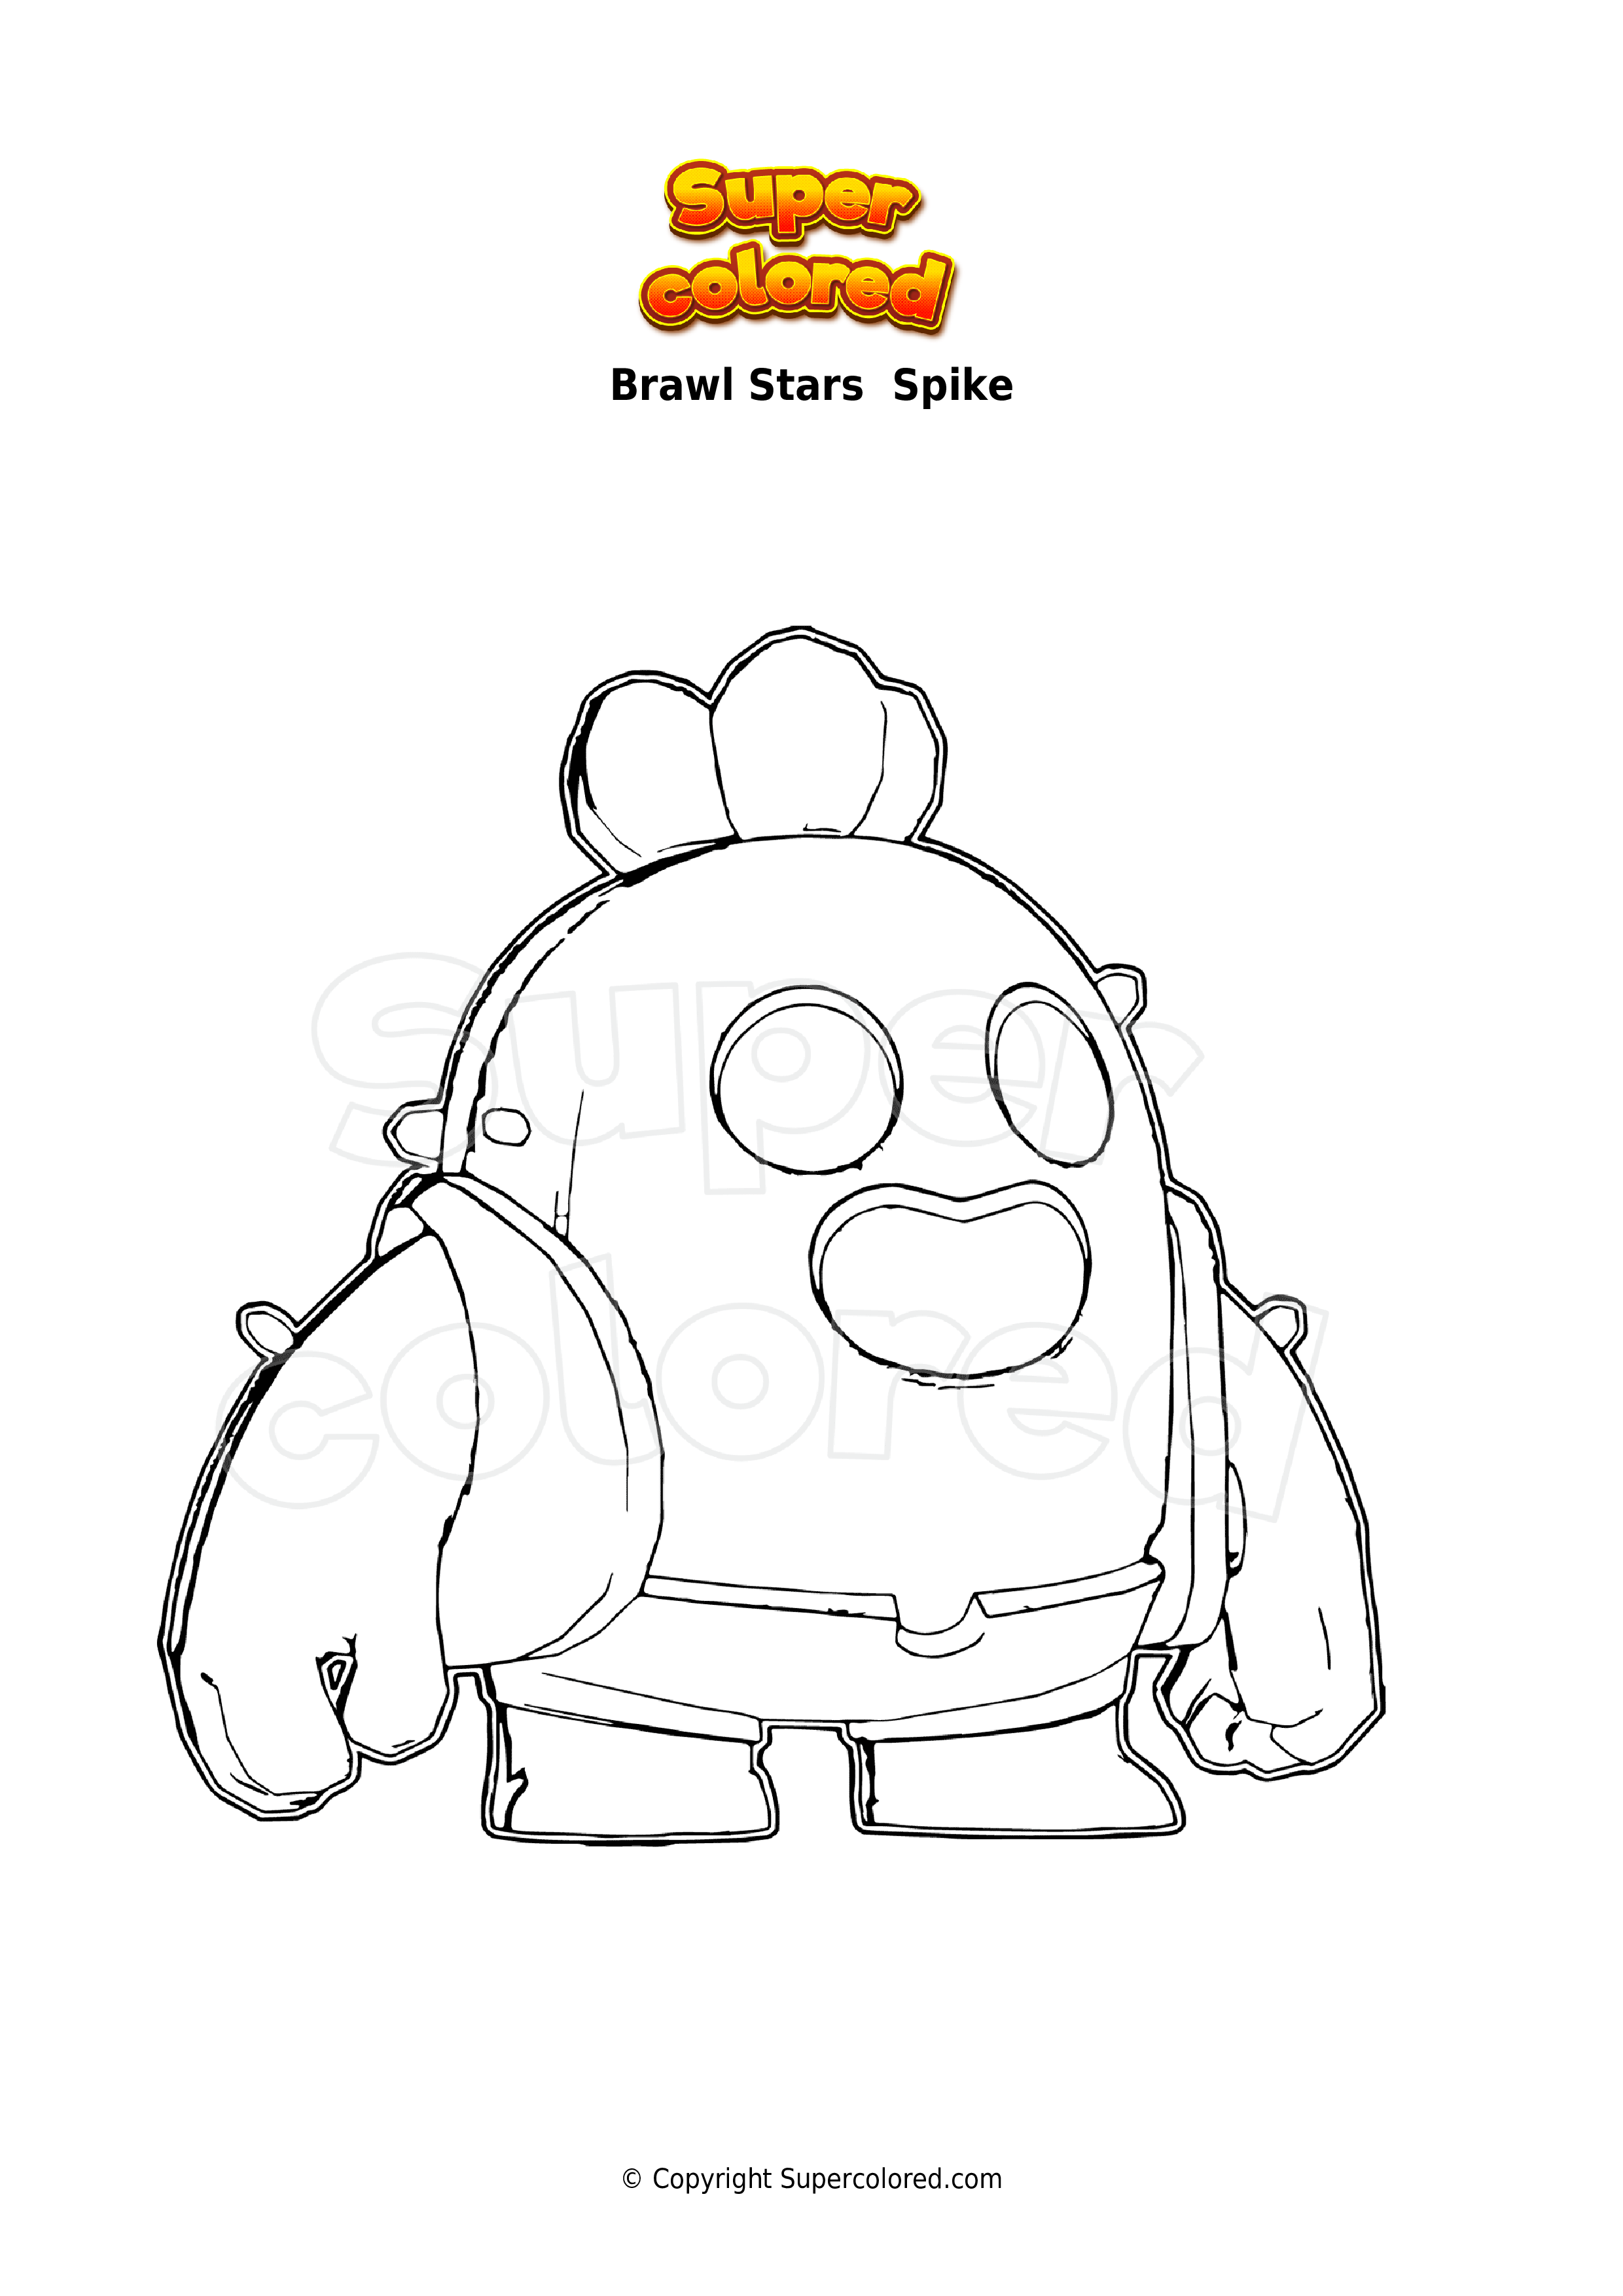 Coloring Pages Brawl Stars Supercolored - disegni spike brawl stars